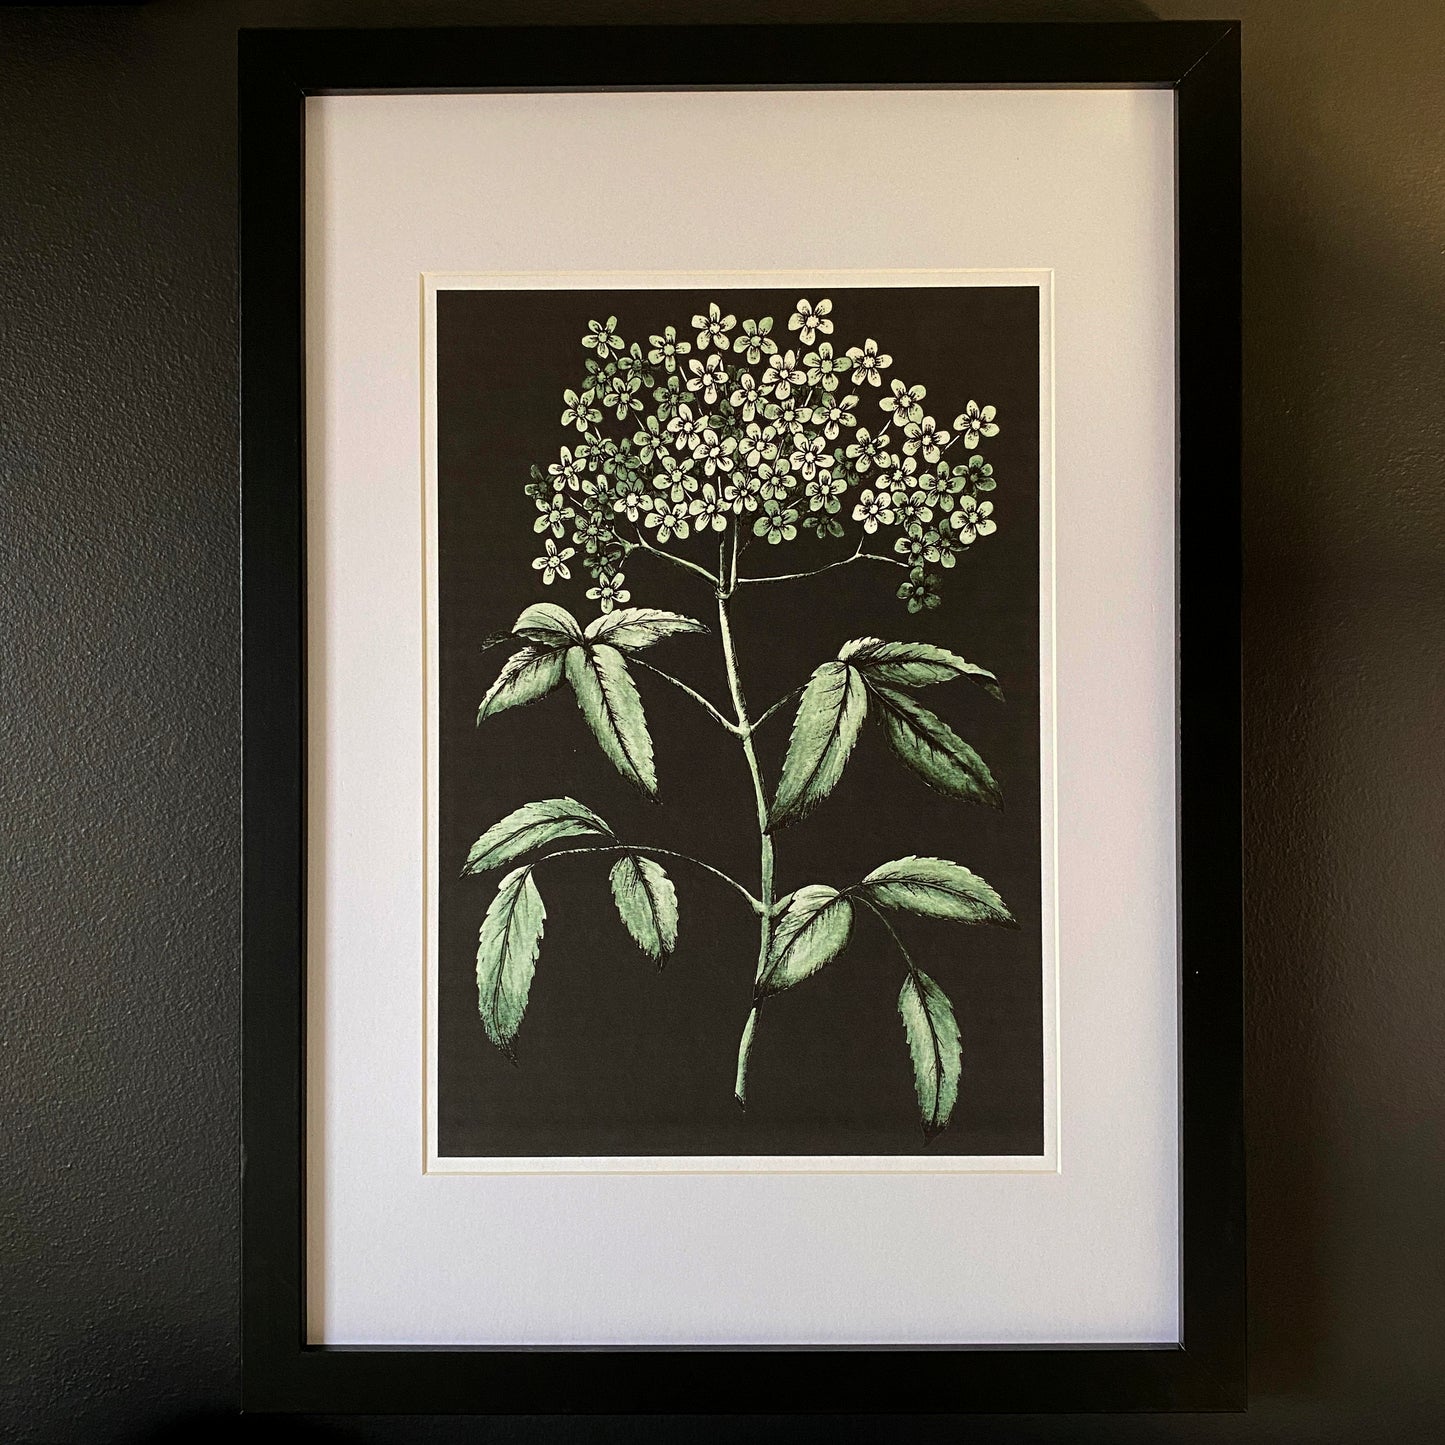 Elderberry watercolour print, in a vintage style. Printed onto a black bakground giving the artwork a moody feel